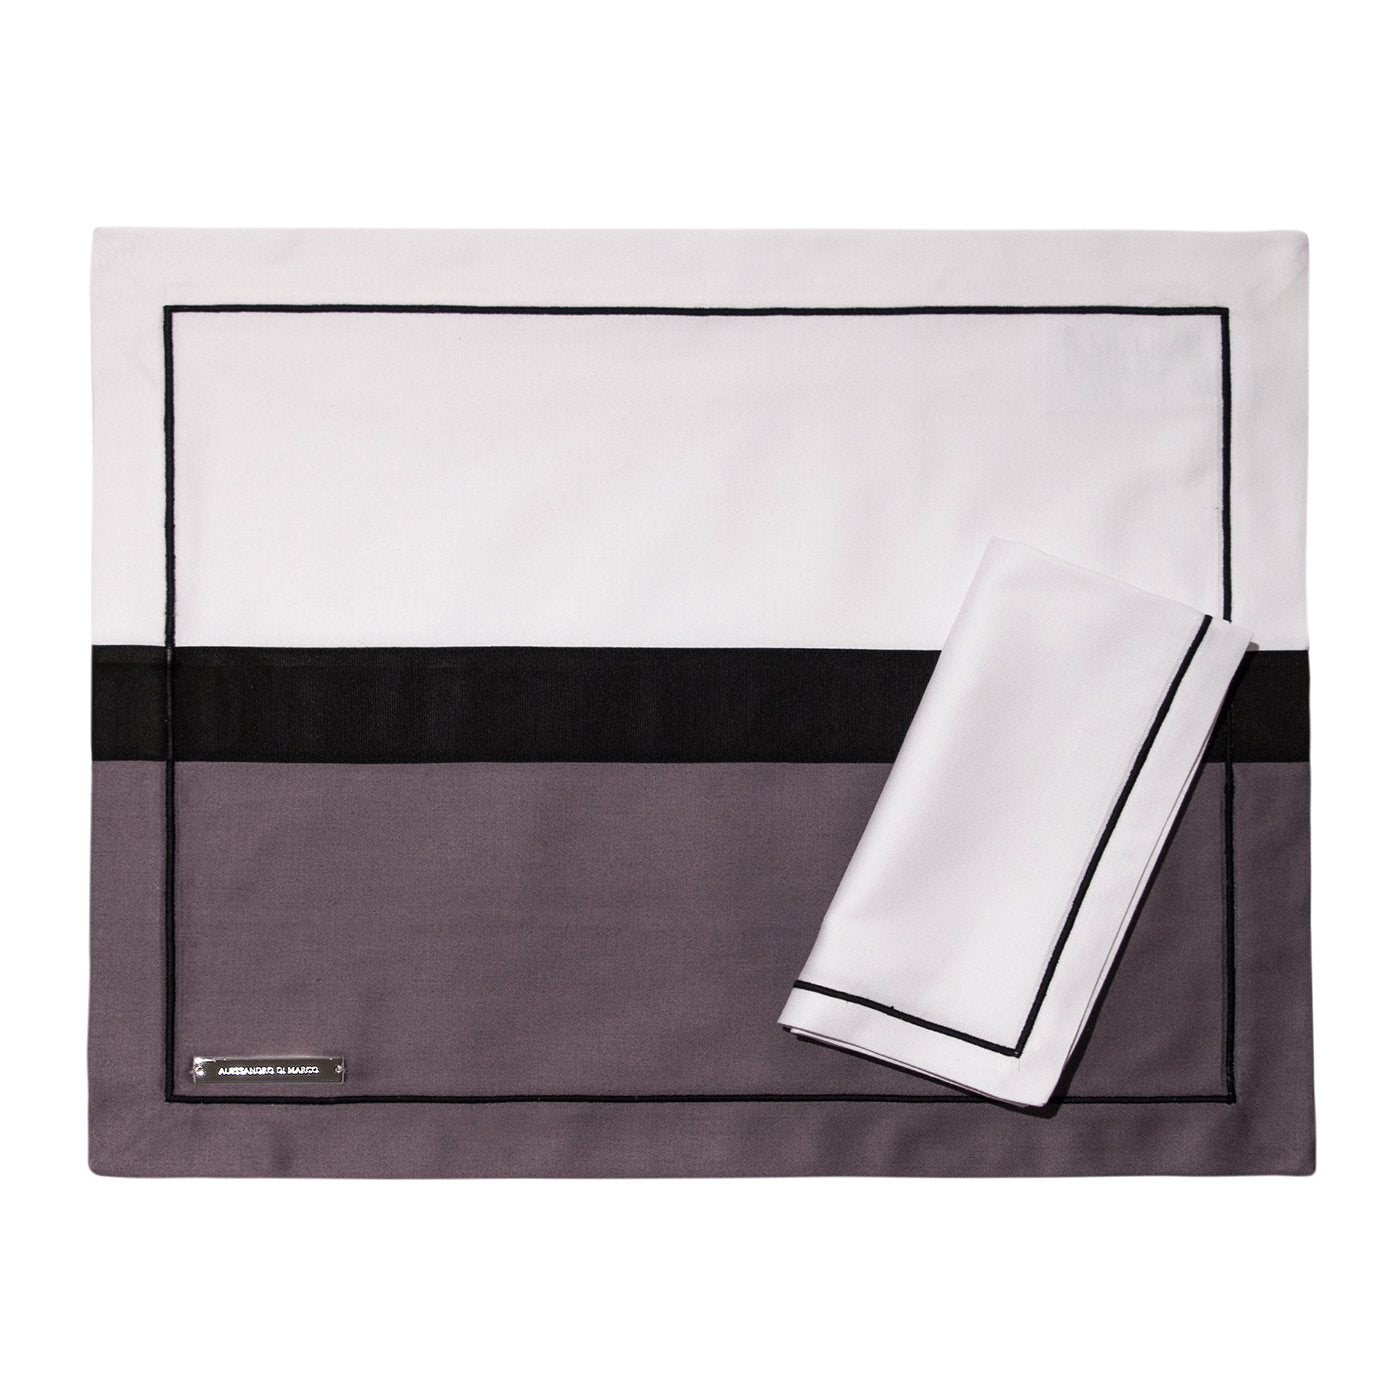 Placemats and Napkins - Two Toned Gray and White - Alternative view 1